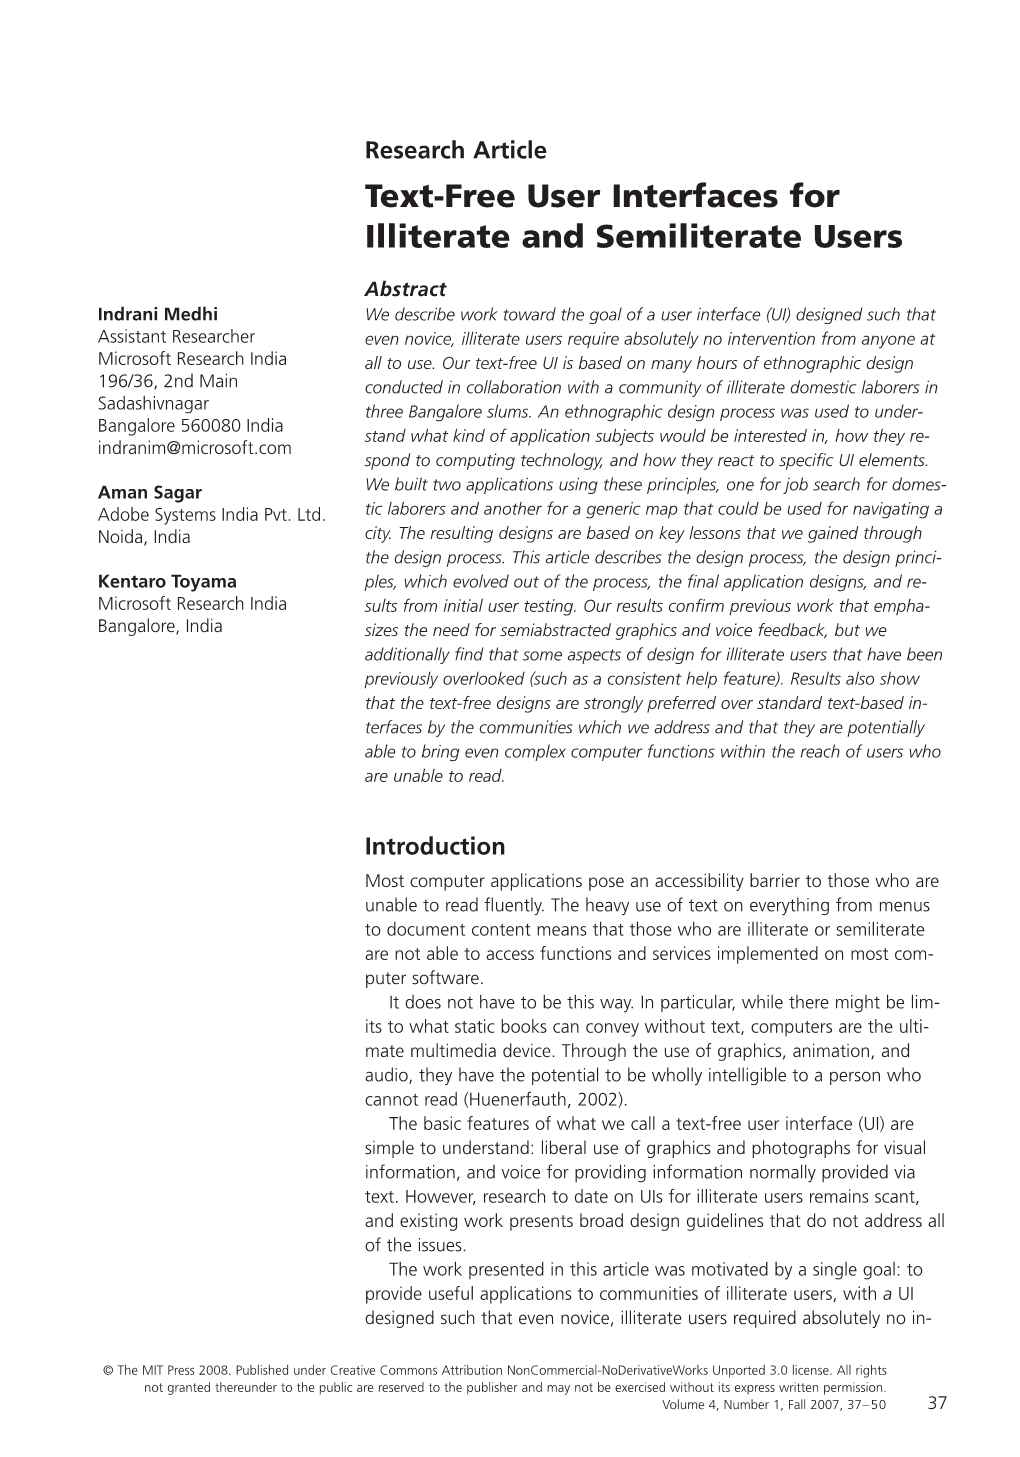 Text-Free User Interfaces for Illiterate and Semiliterate Users MEDHI, SAGAR, TOYAMA